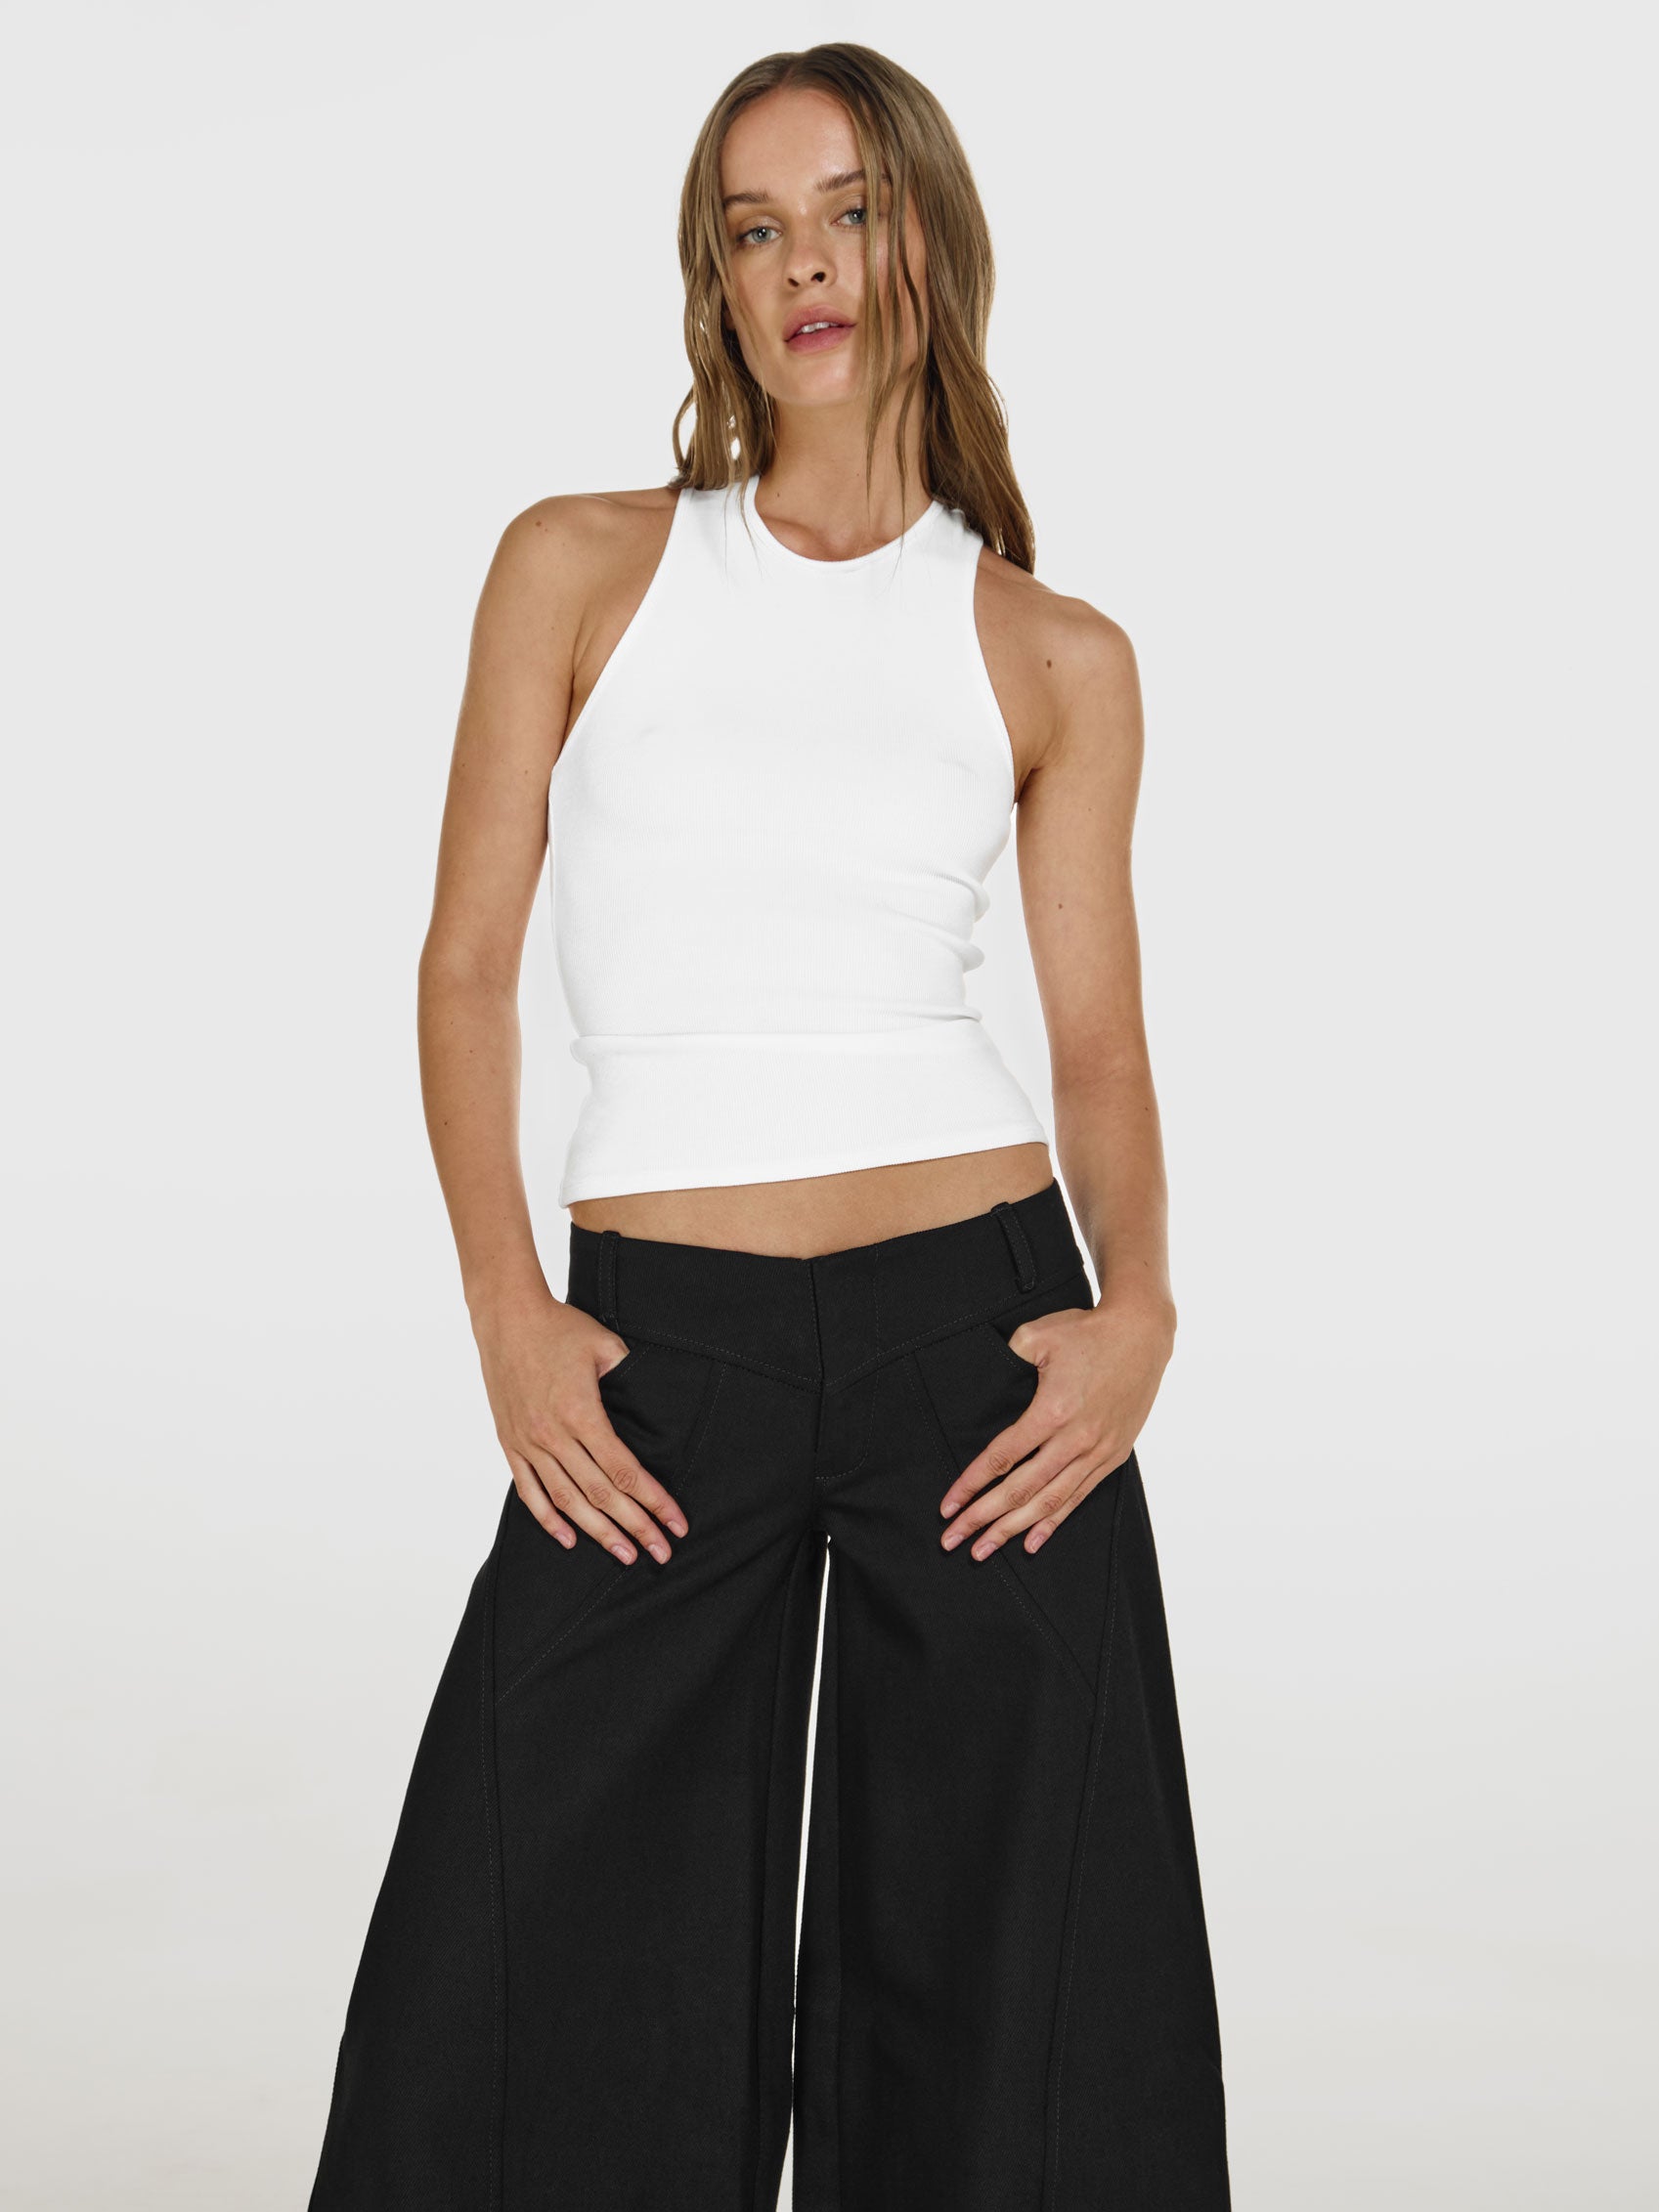 Medium full shot of a girl in a white viscose tank top and black wide leg jeans with low rise